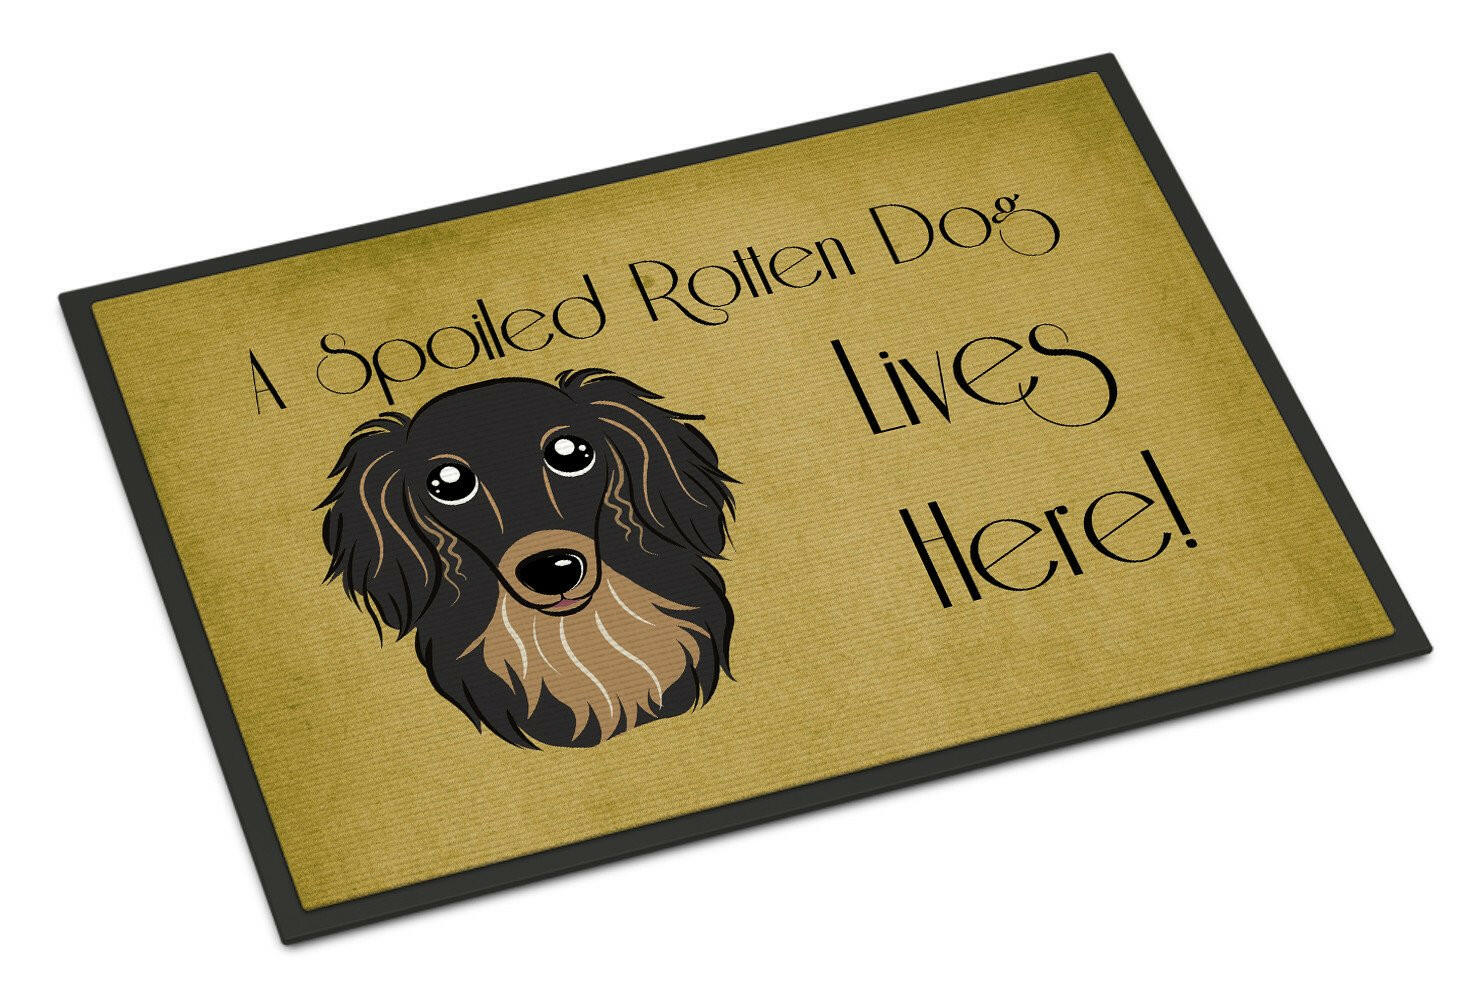 Longhair Black and Tan Dachshund Spoiled Dog Lives Here Indoor or Outdoor Mat 18x27 BB1461MAT - the-store.com